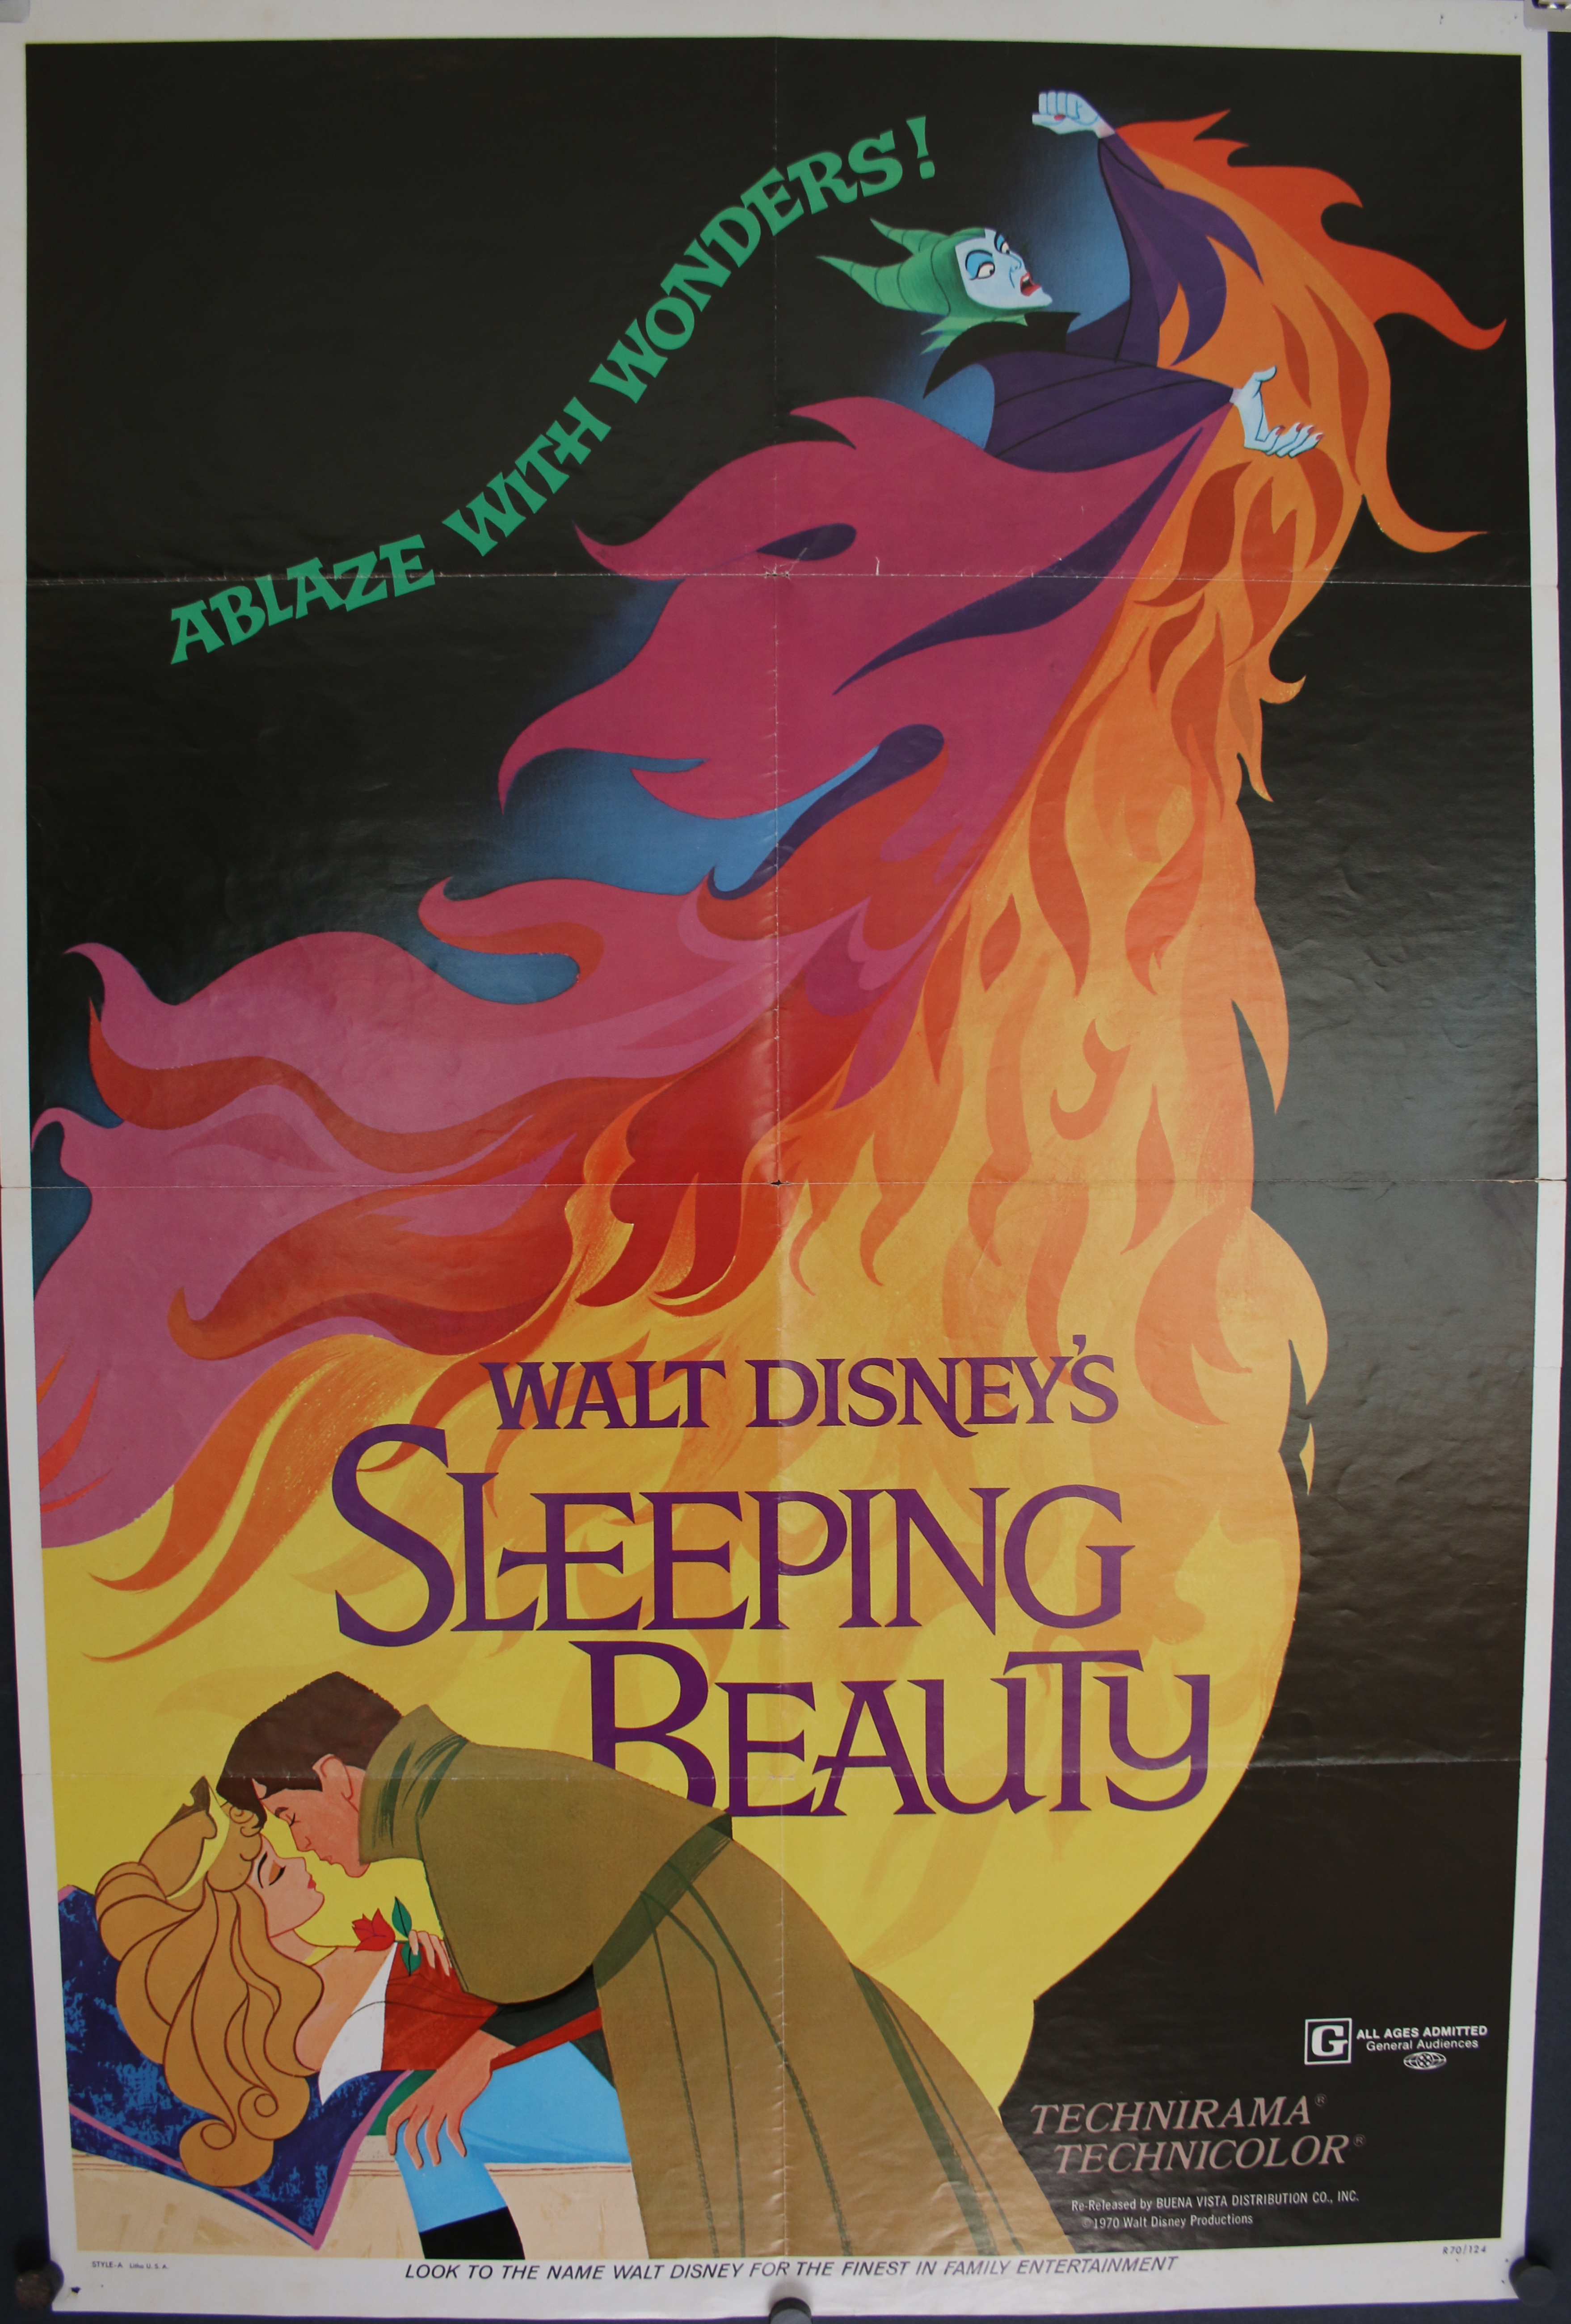 Vintage Sleeping Beauty Movie Poster// Classic Disney Movie Poster//Movie Poster